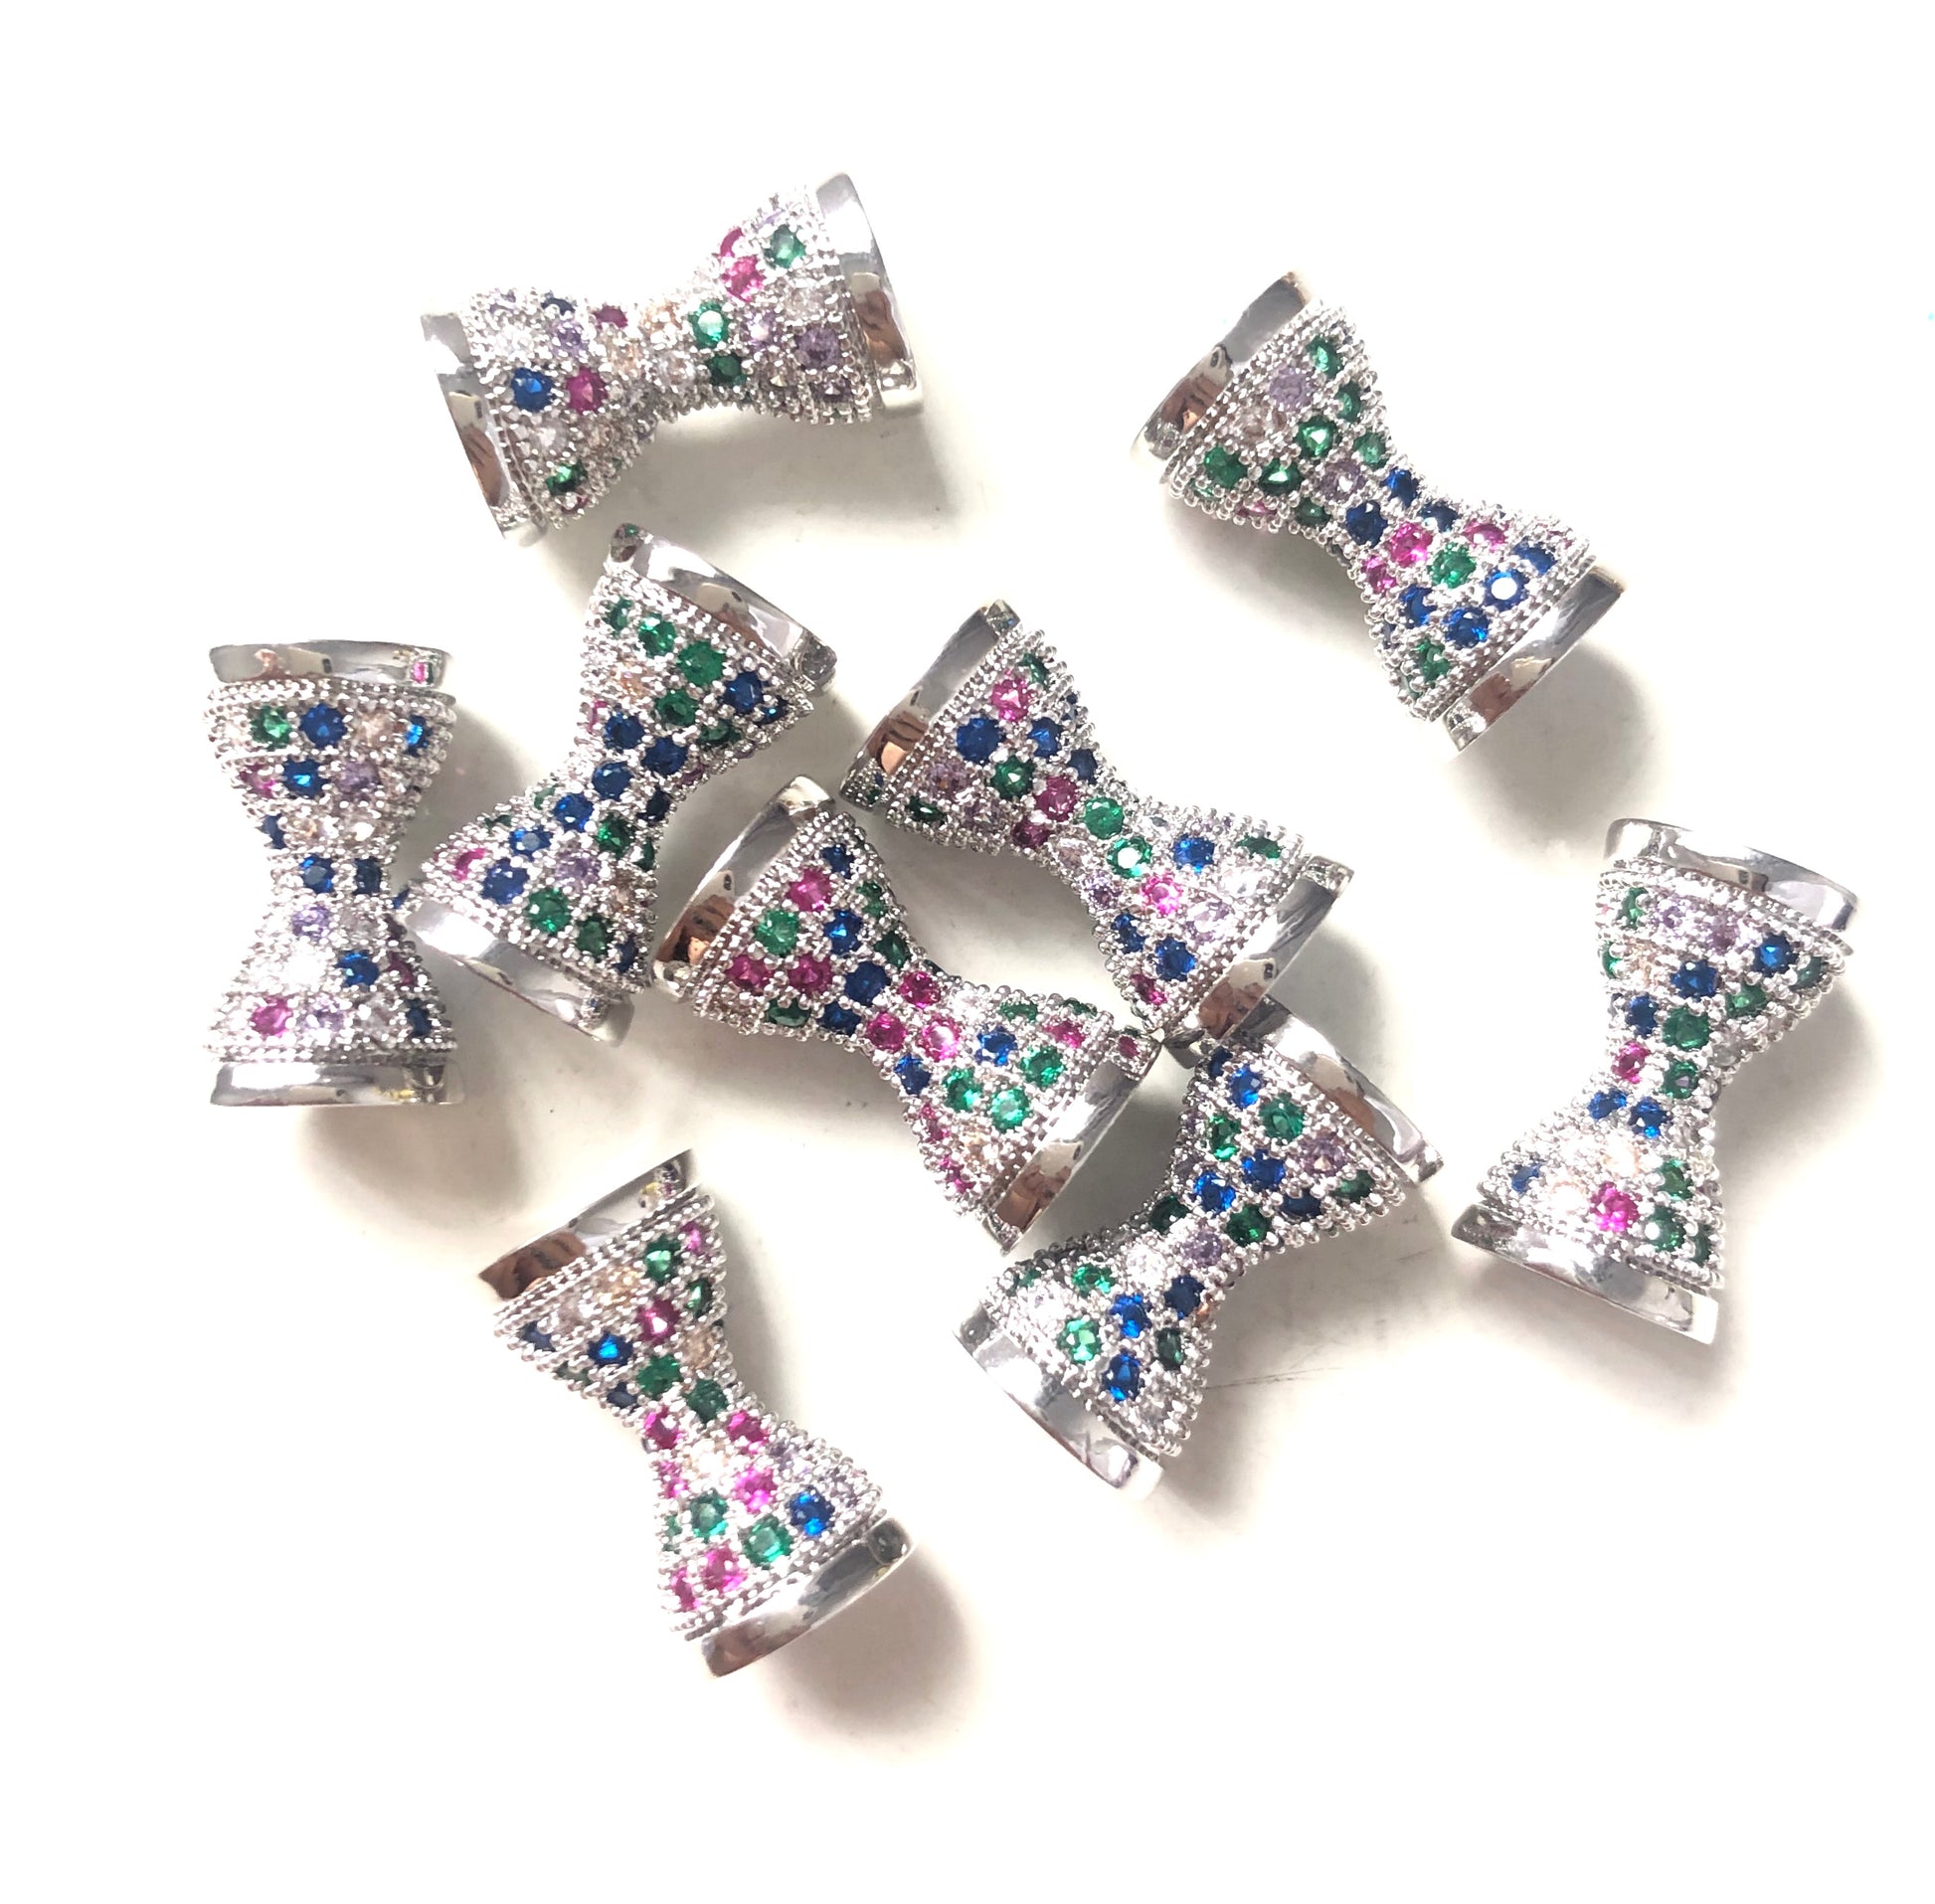 10pcs/lot 17.5*9.6mm Multicolor CZ Paved Hourglass Spacers Silver CZ Paved Spacers Colorful Zirconia Hourglass Beads Charms Beads Beyond